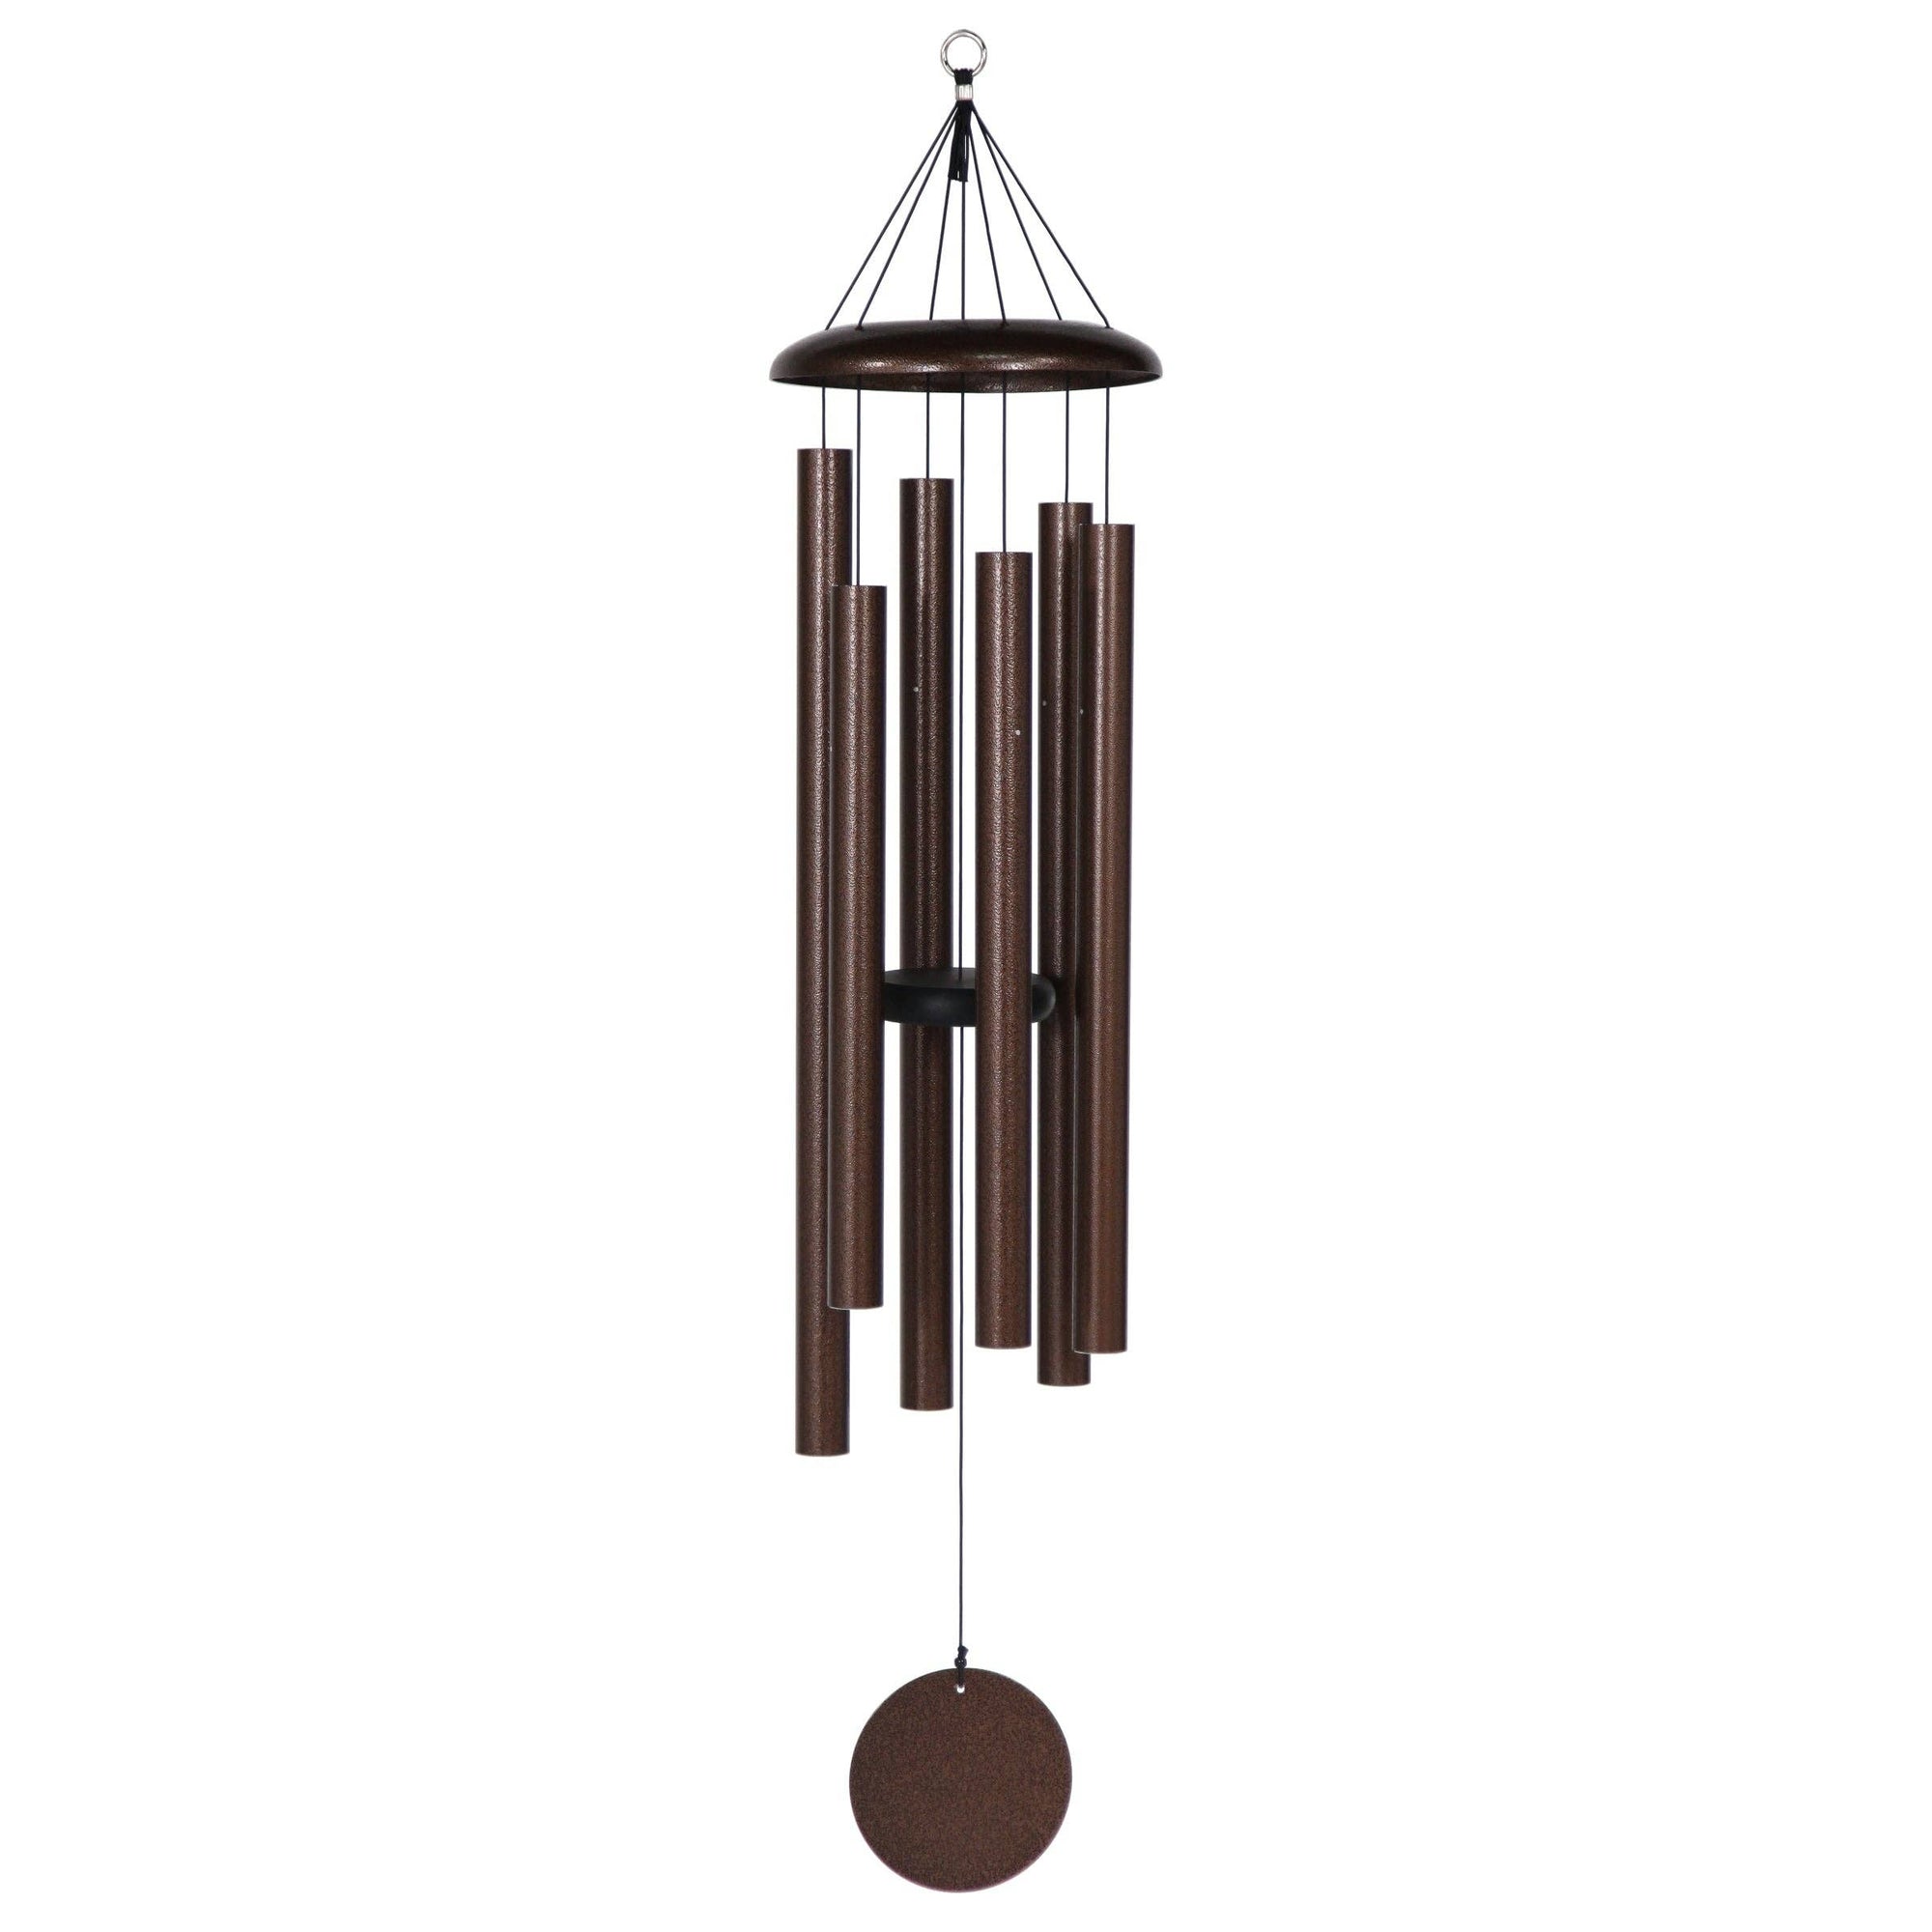 A Corinthian Bells® 50-inch Windchime with soothing tones hanging on a white background.